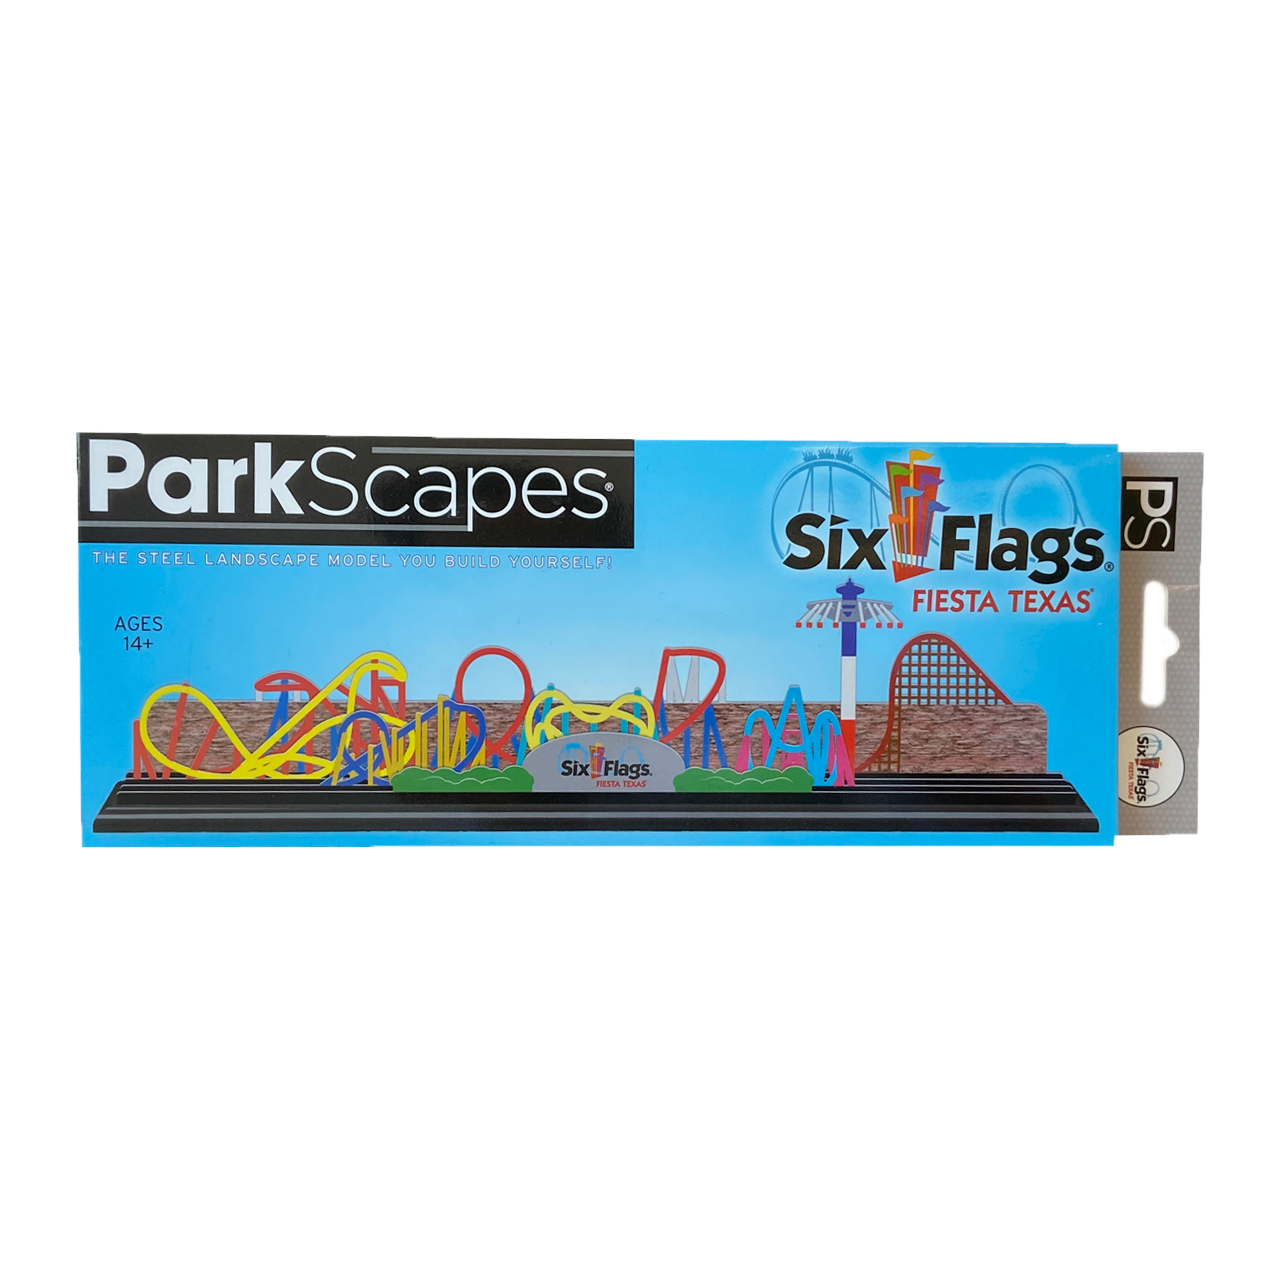 SIX FLAGS PARKSCAPES - FIESTA TEXAS